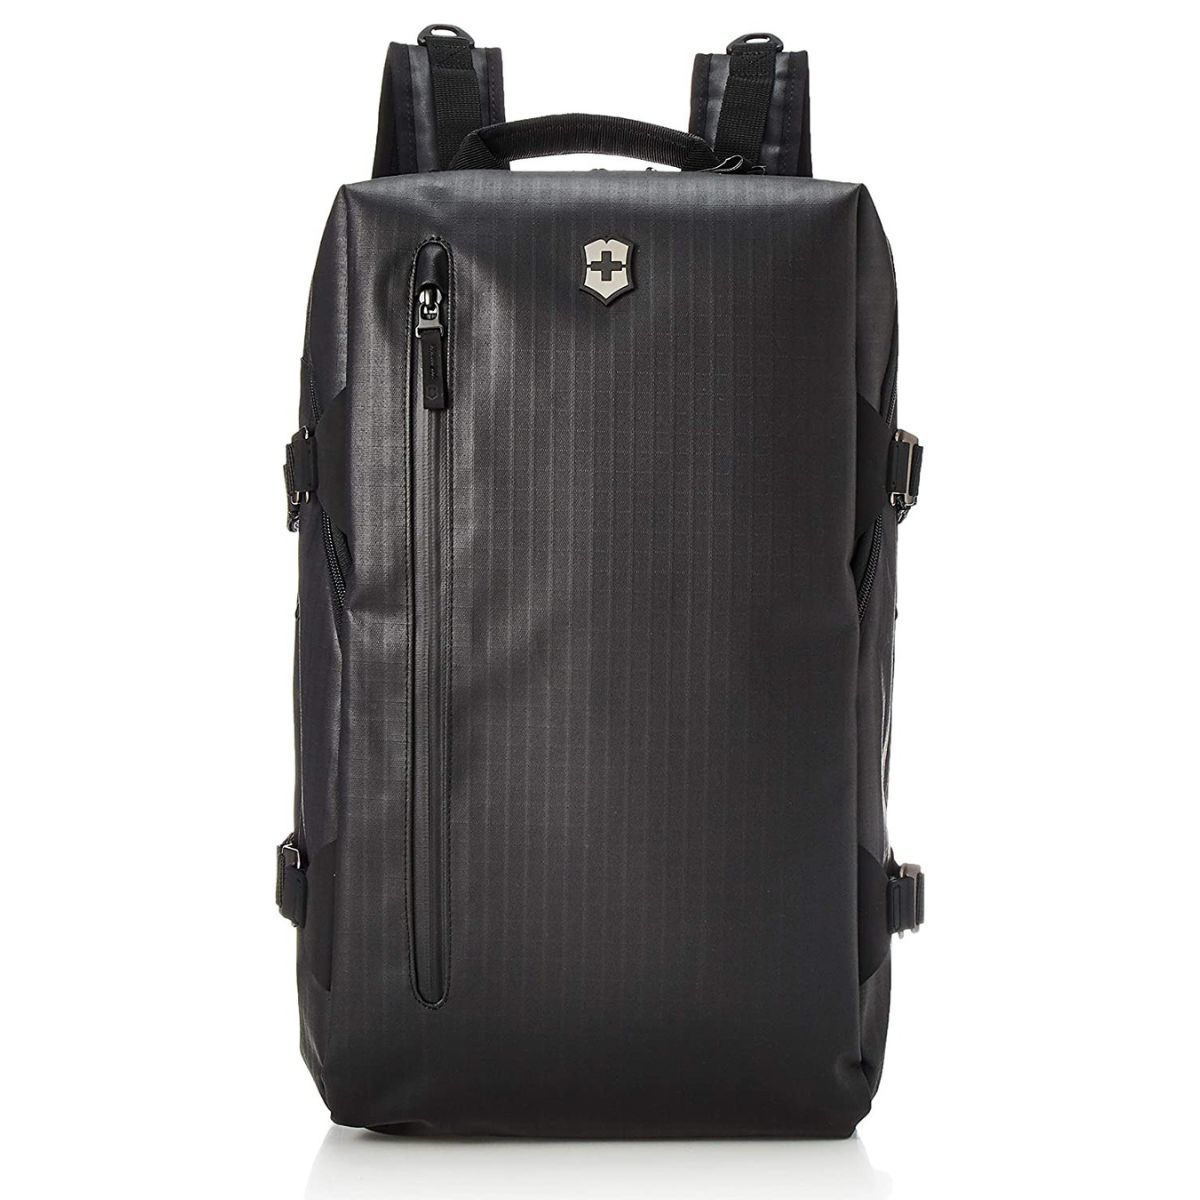 VX Touring Laptop Backpack